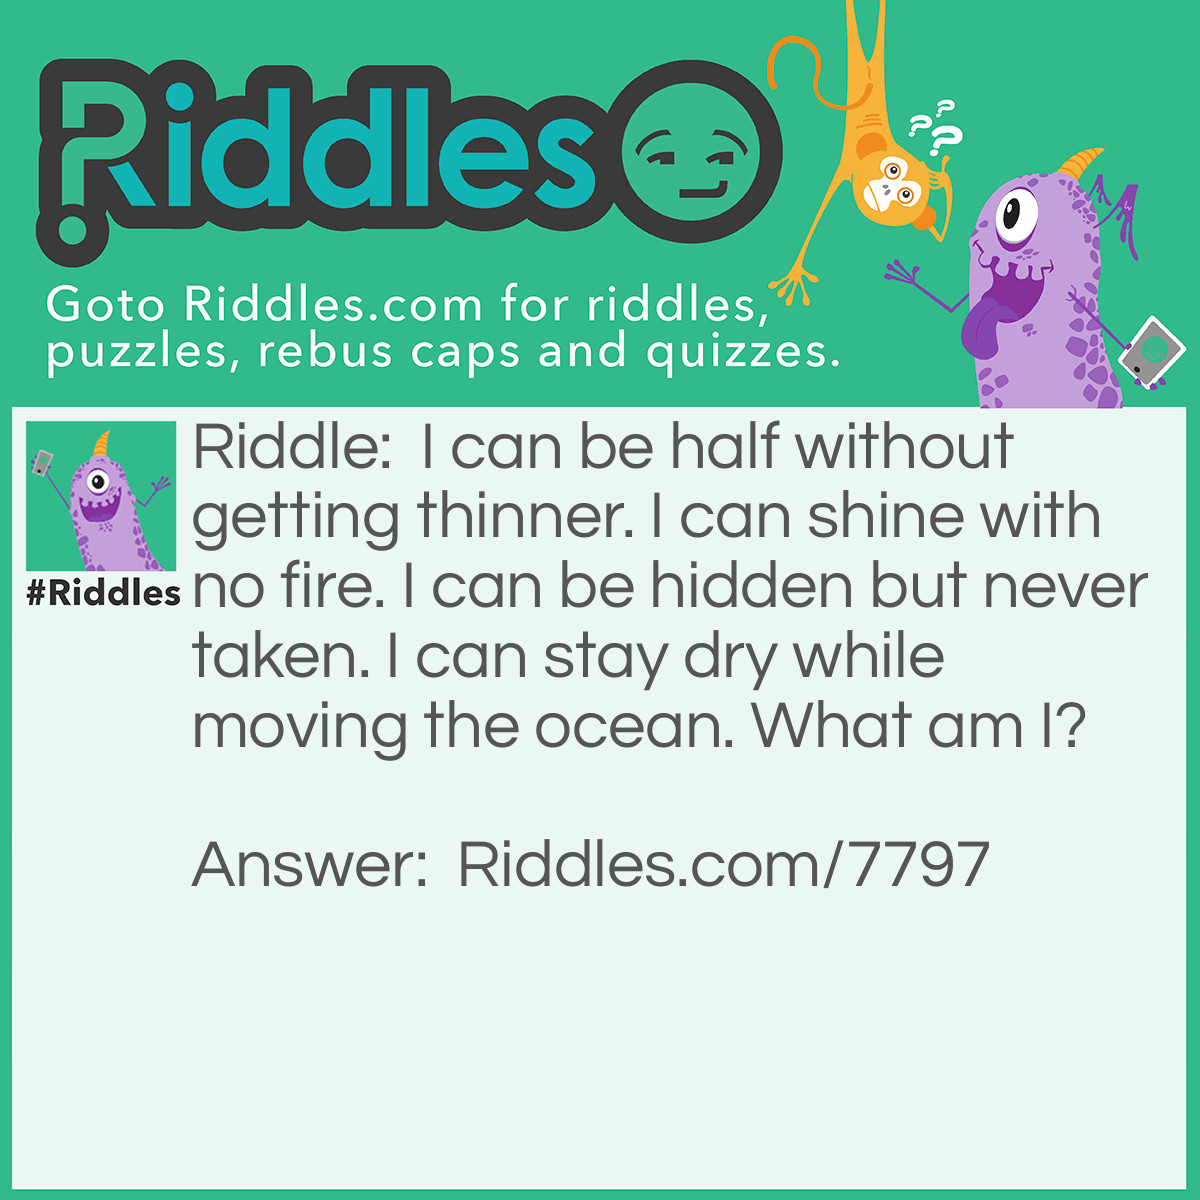 Riddle: I can be half without getting thinner. I can shine with no fire. I can be hidden but never taken. I can stay dry while moving the ocean. What am I? Answer: The Moon.